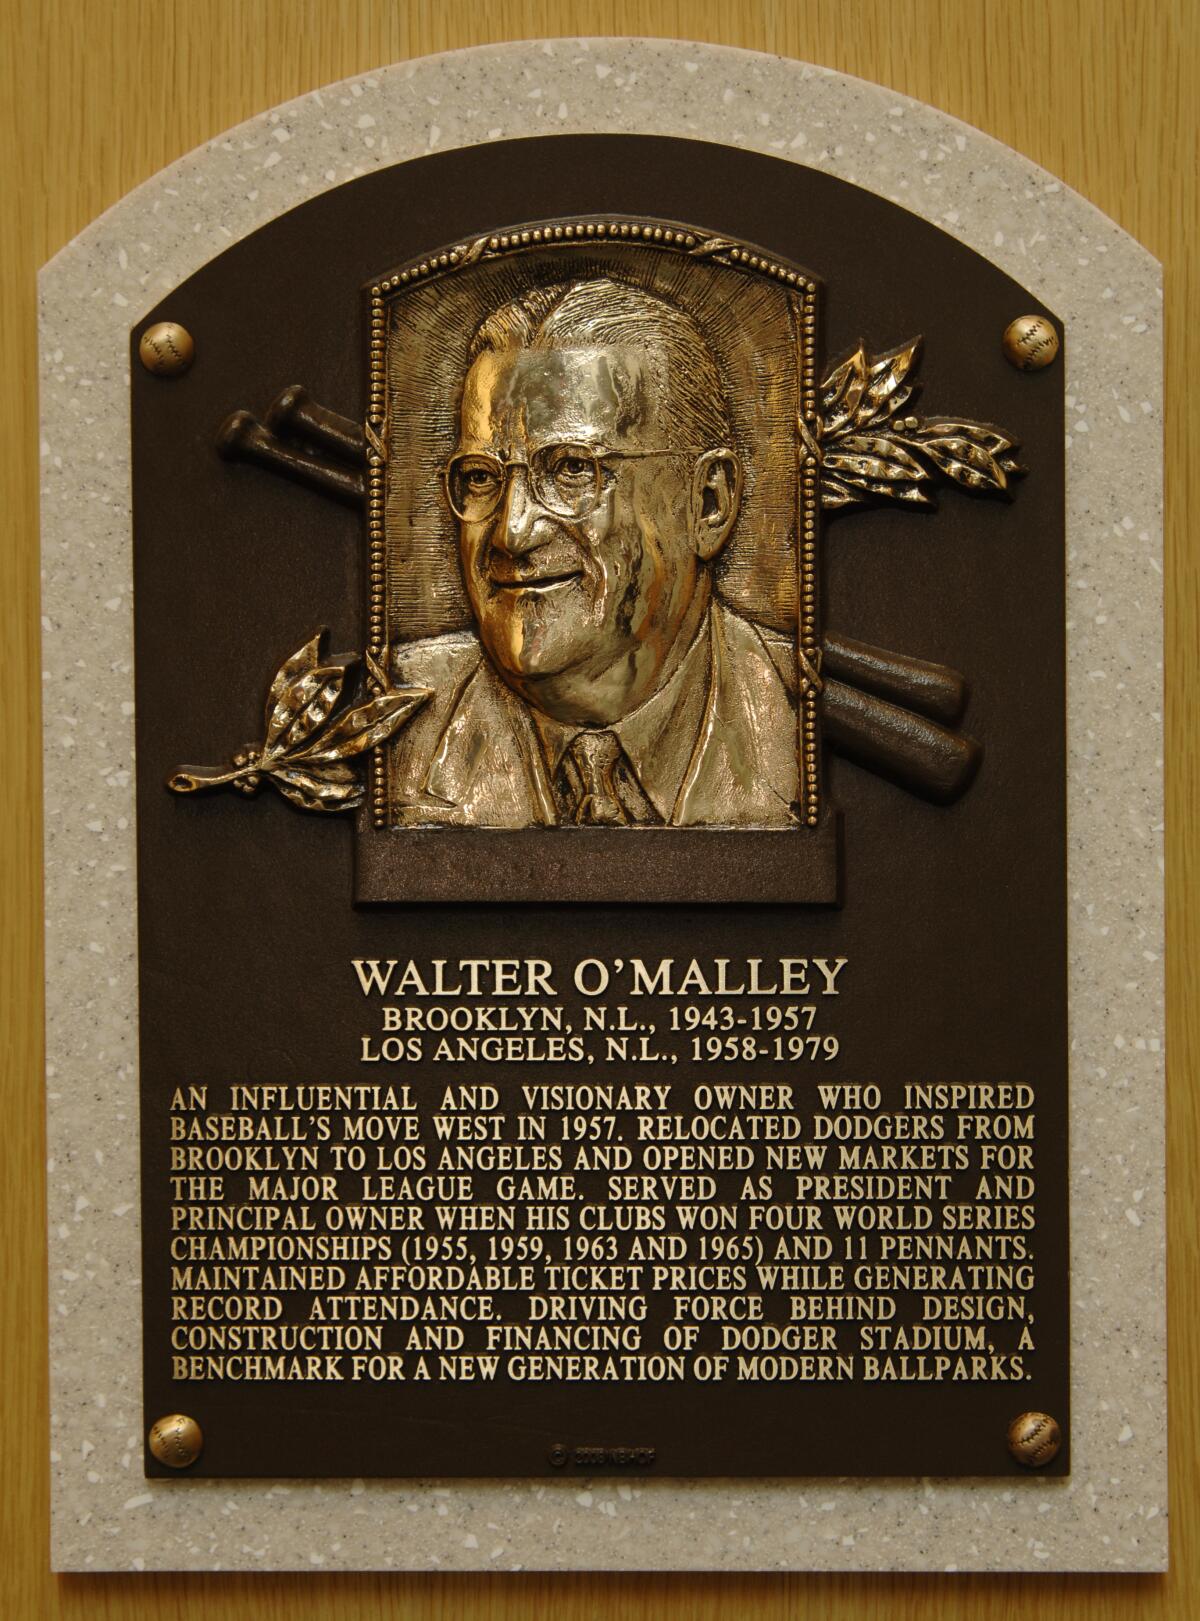 Walter O'Malley plaque at the National Baseball Hall of Fame and Museum